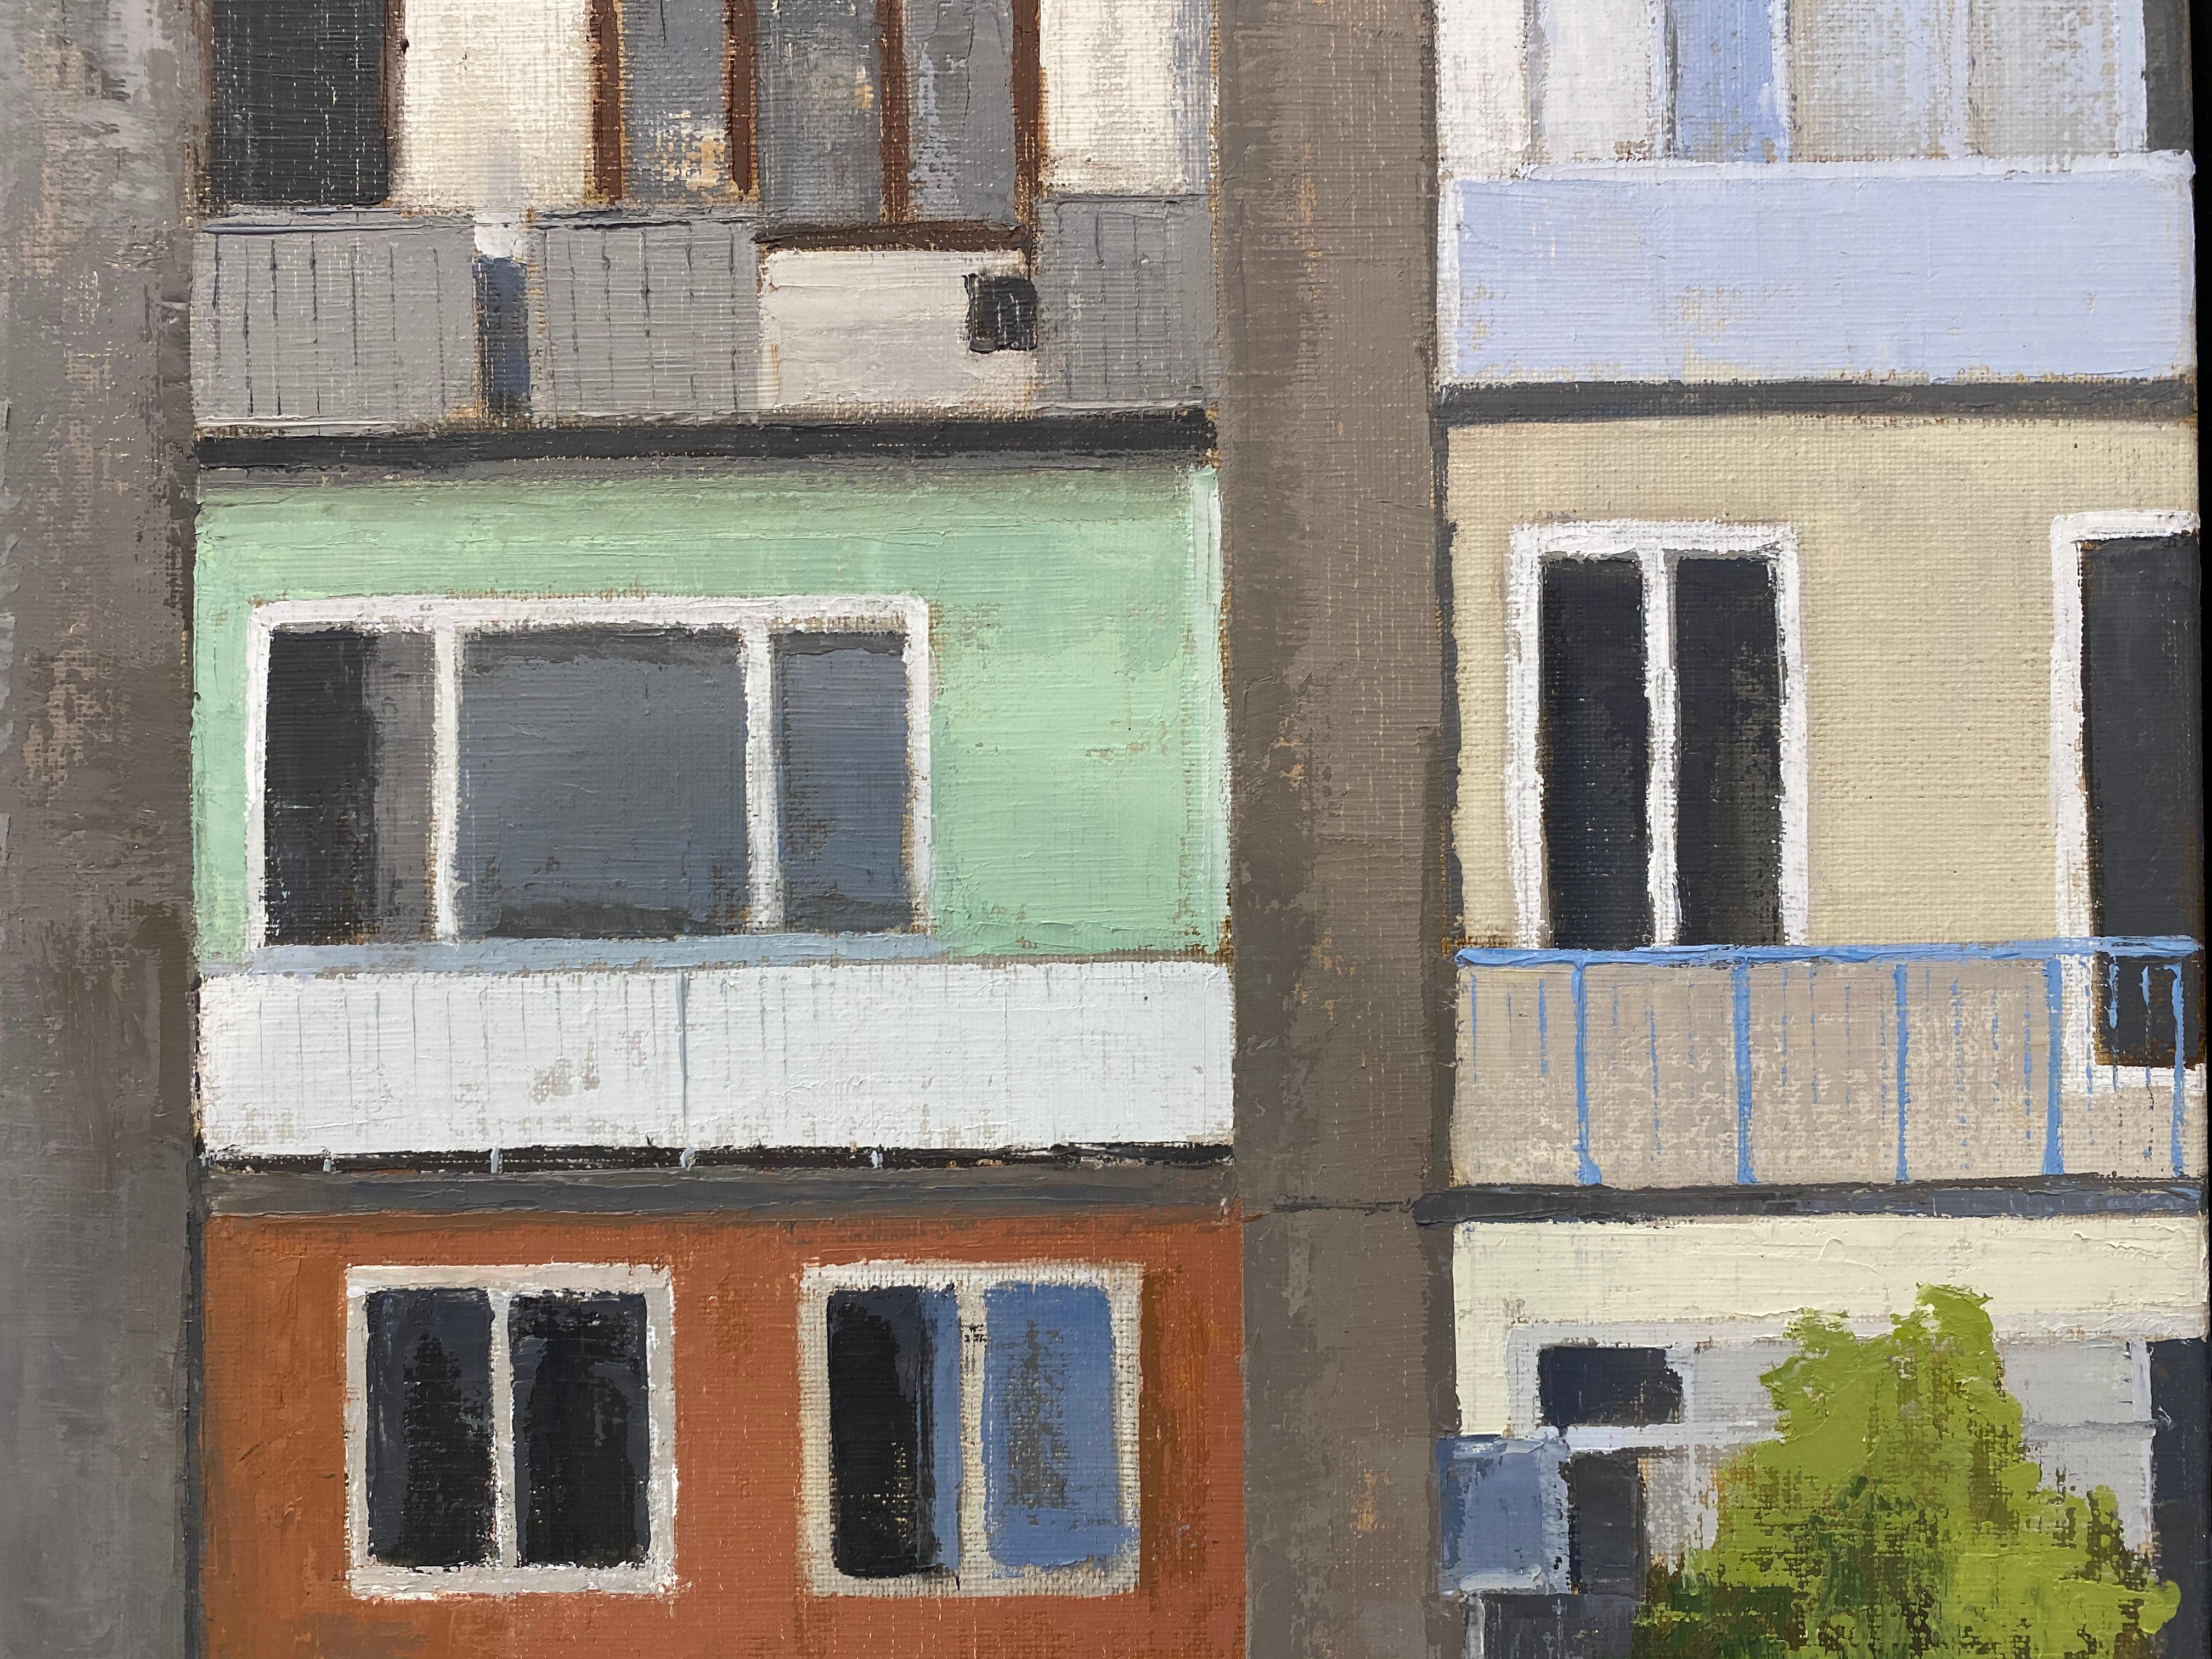 Apartment Building II -21st Century Contemporary City scape Painting  1